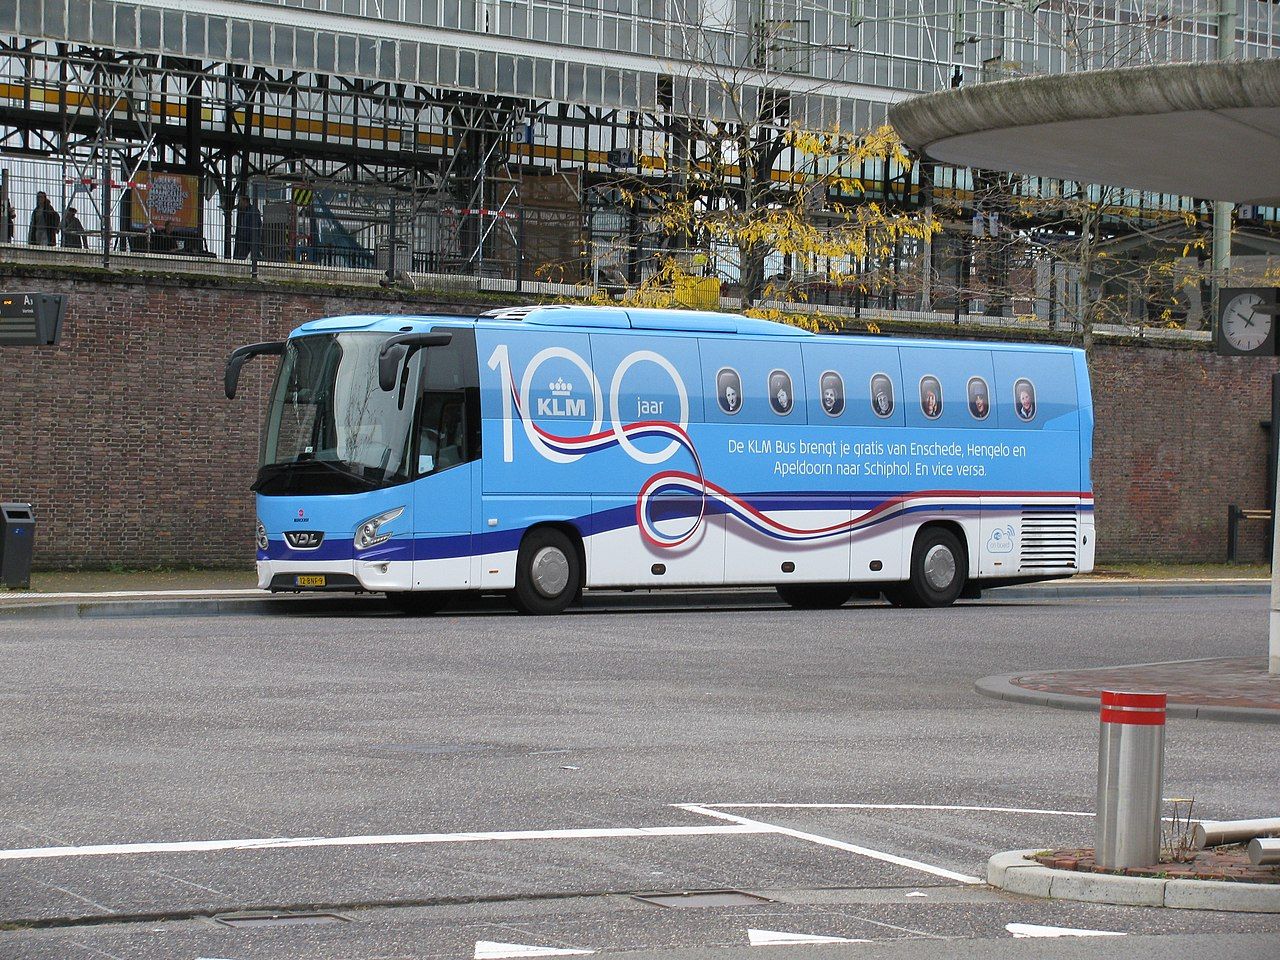 A KLM Bus driving on the street.